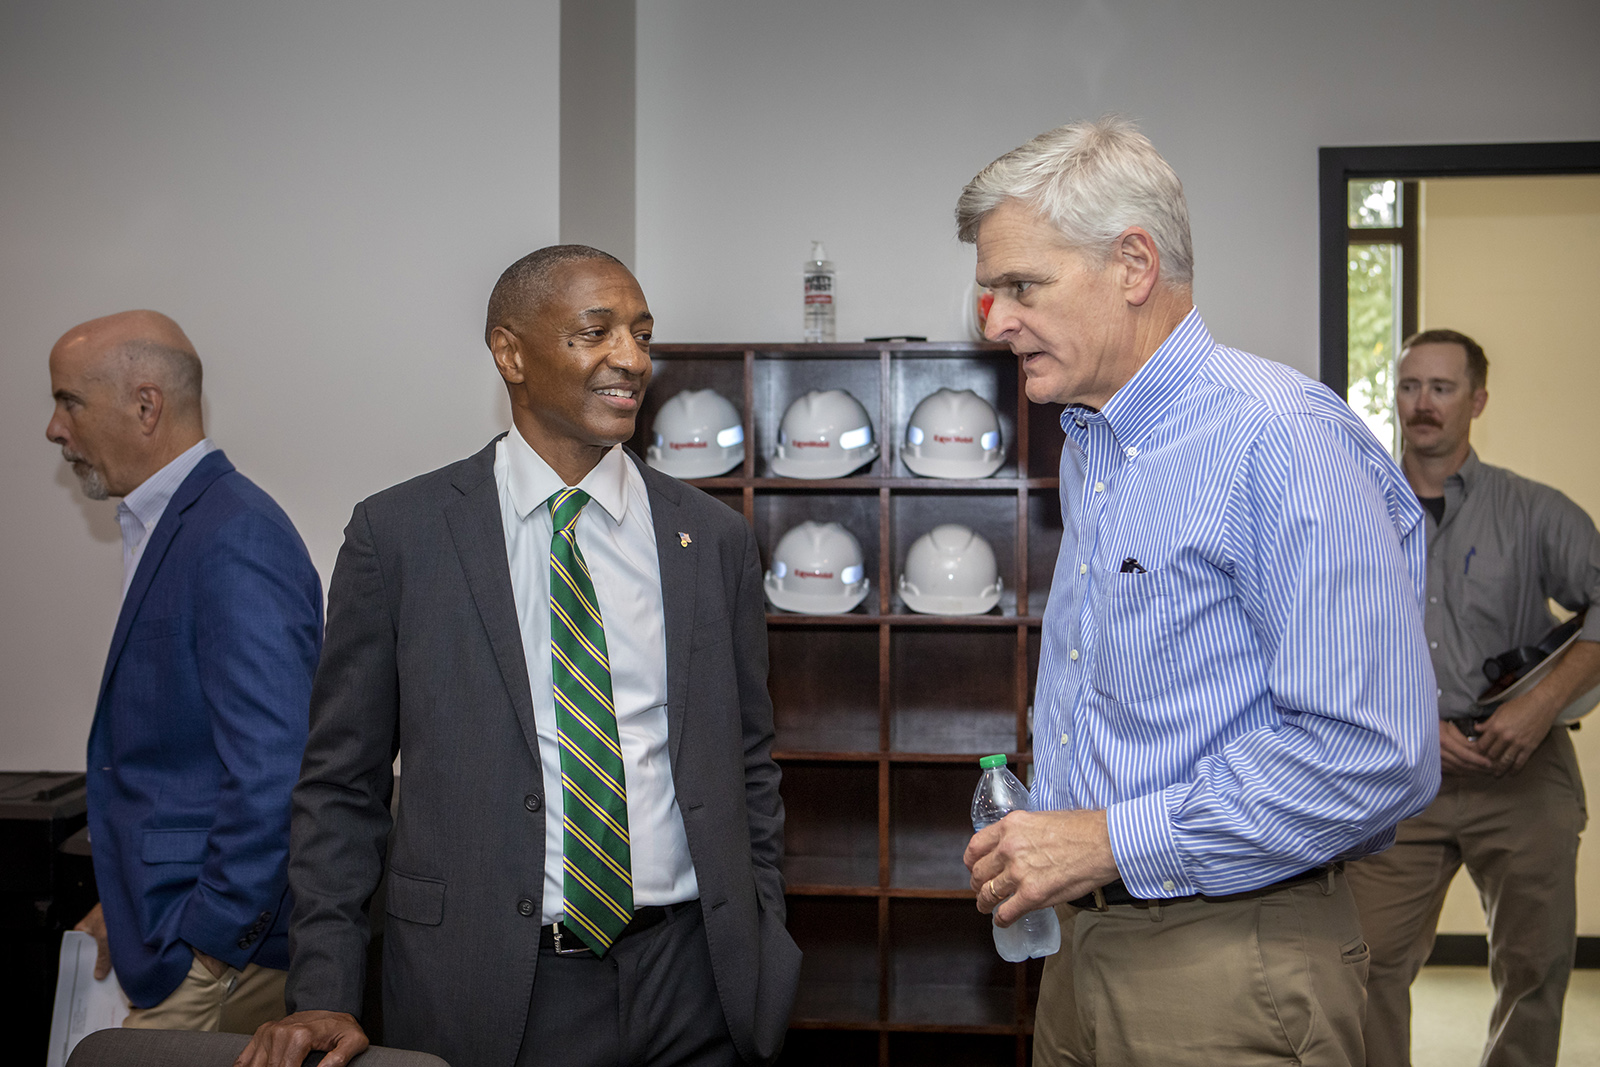 LSU President William F. Tate IV visits with U.S. Sen. Bill Cassidy during Cassidy's LSU visit